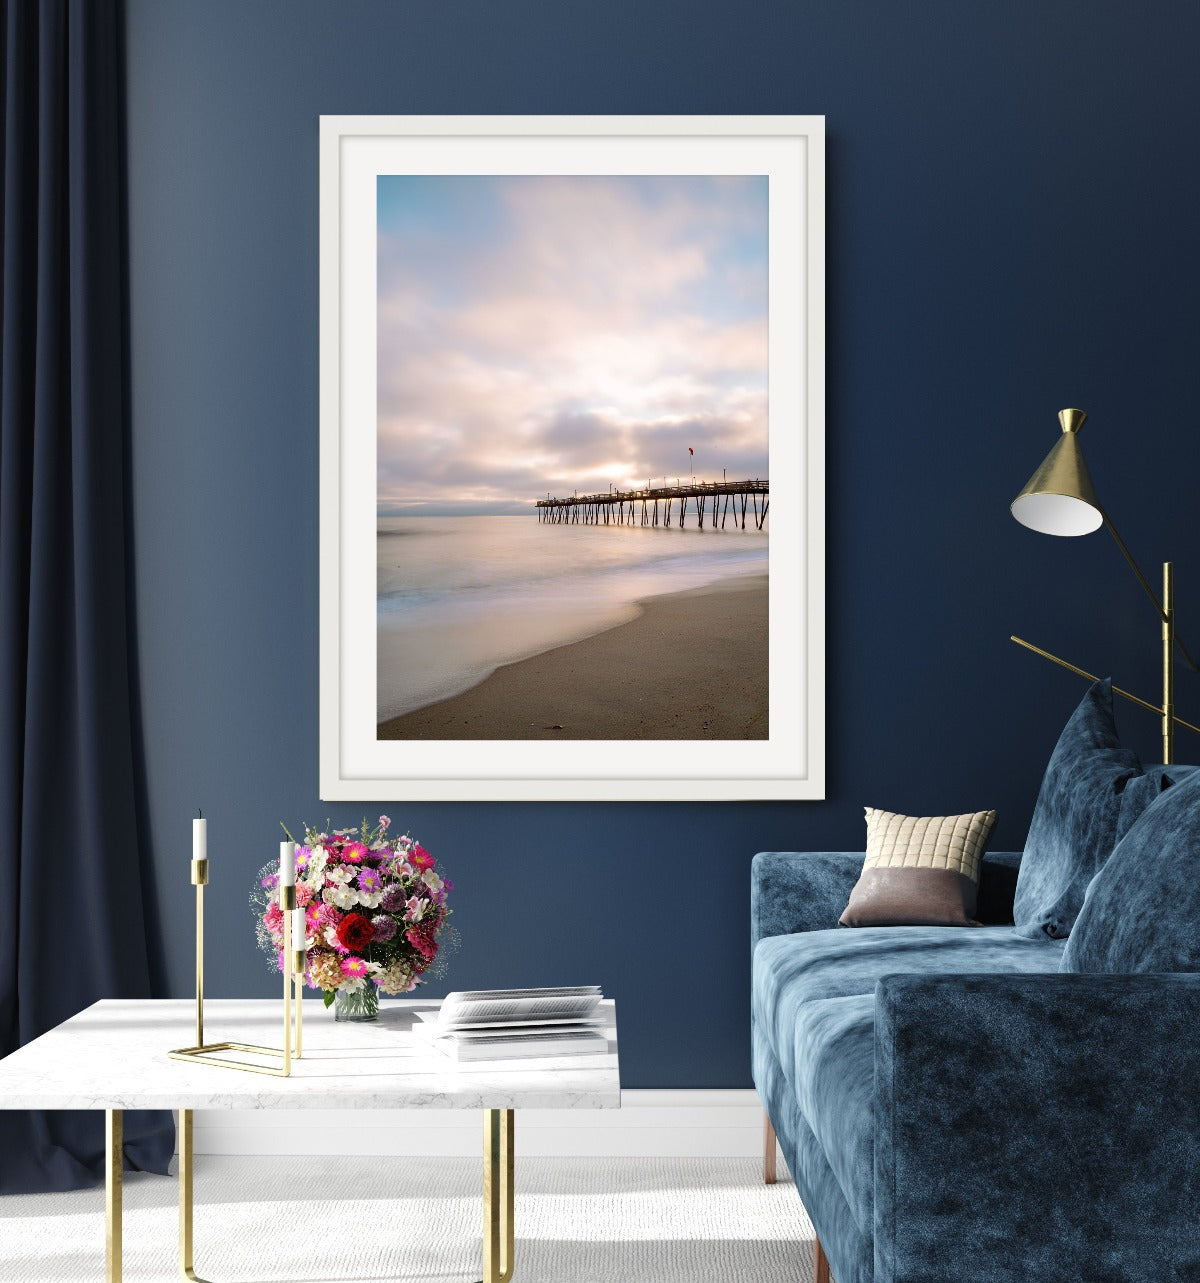 living room decor featuring large framed wall art print, pastel beach photograph by Wright and Roam